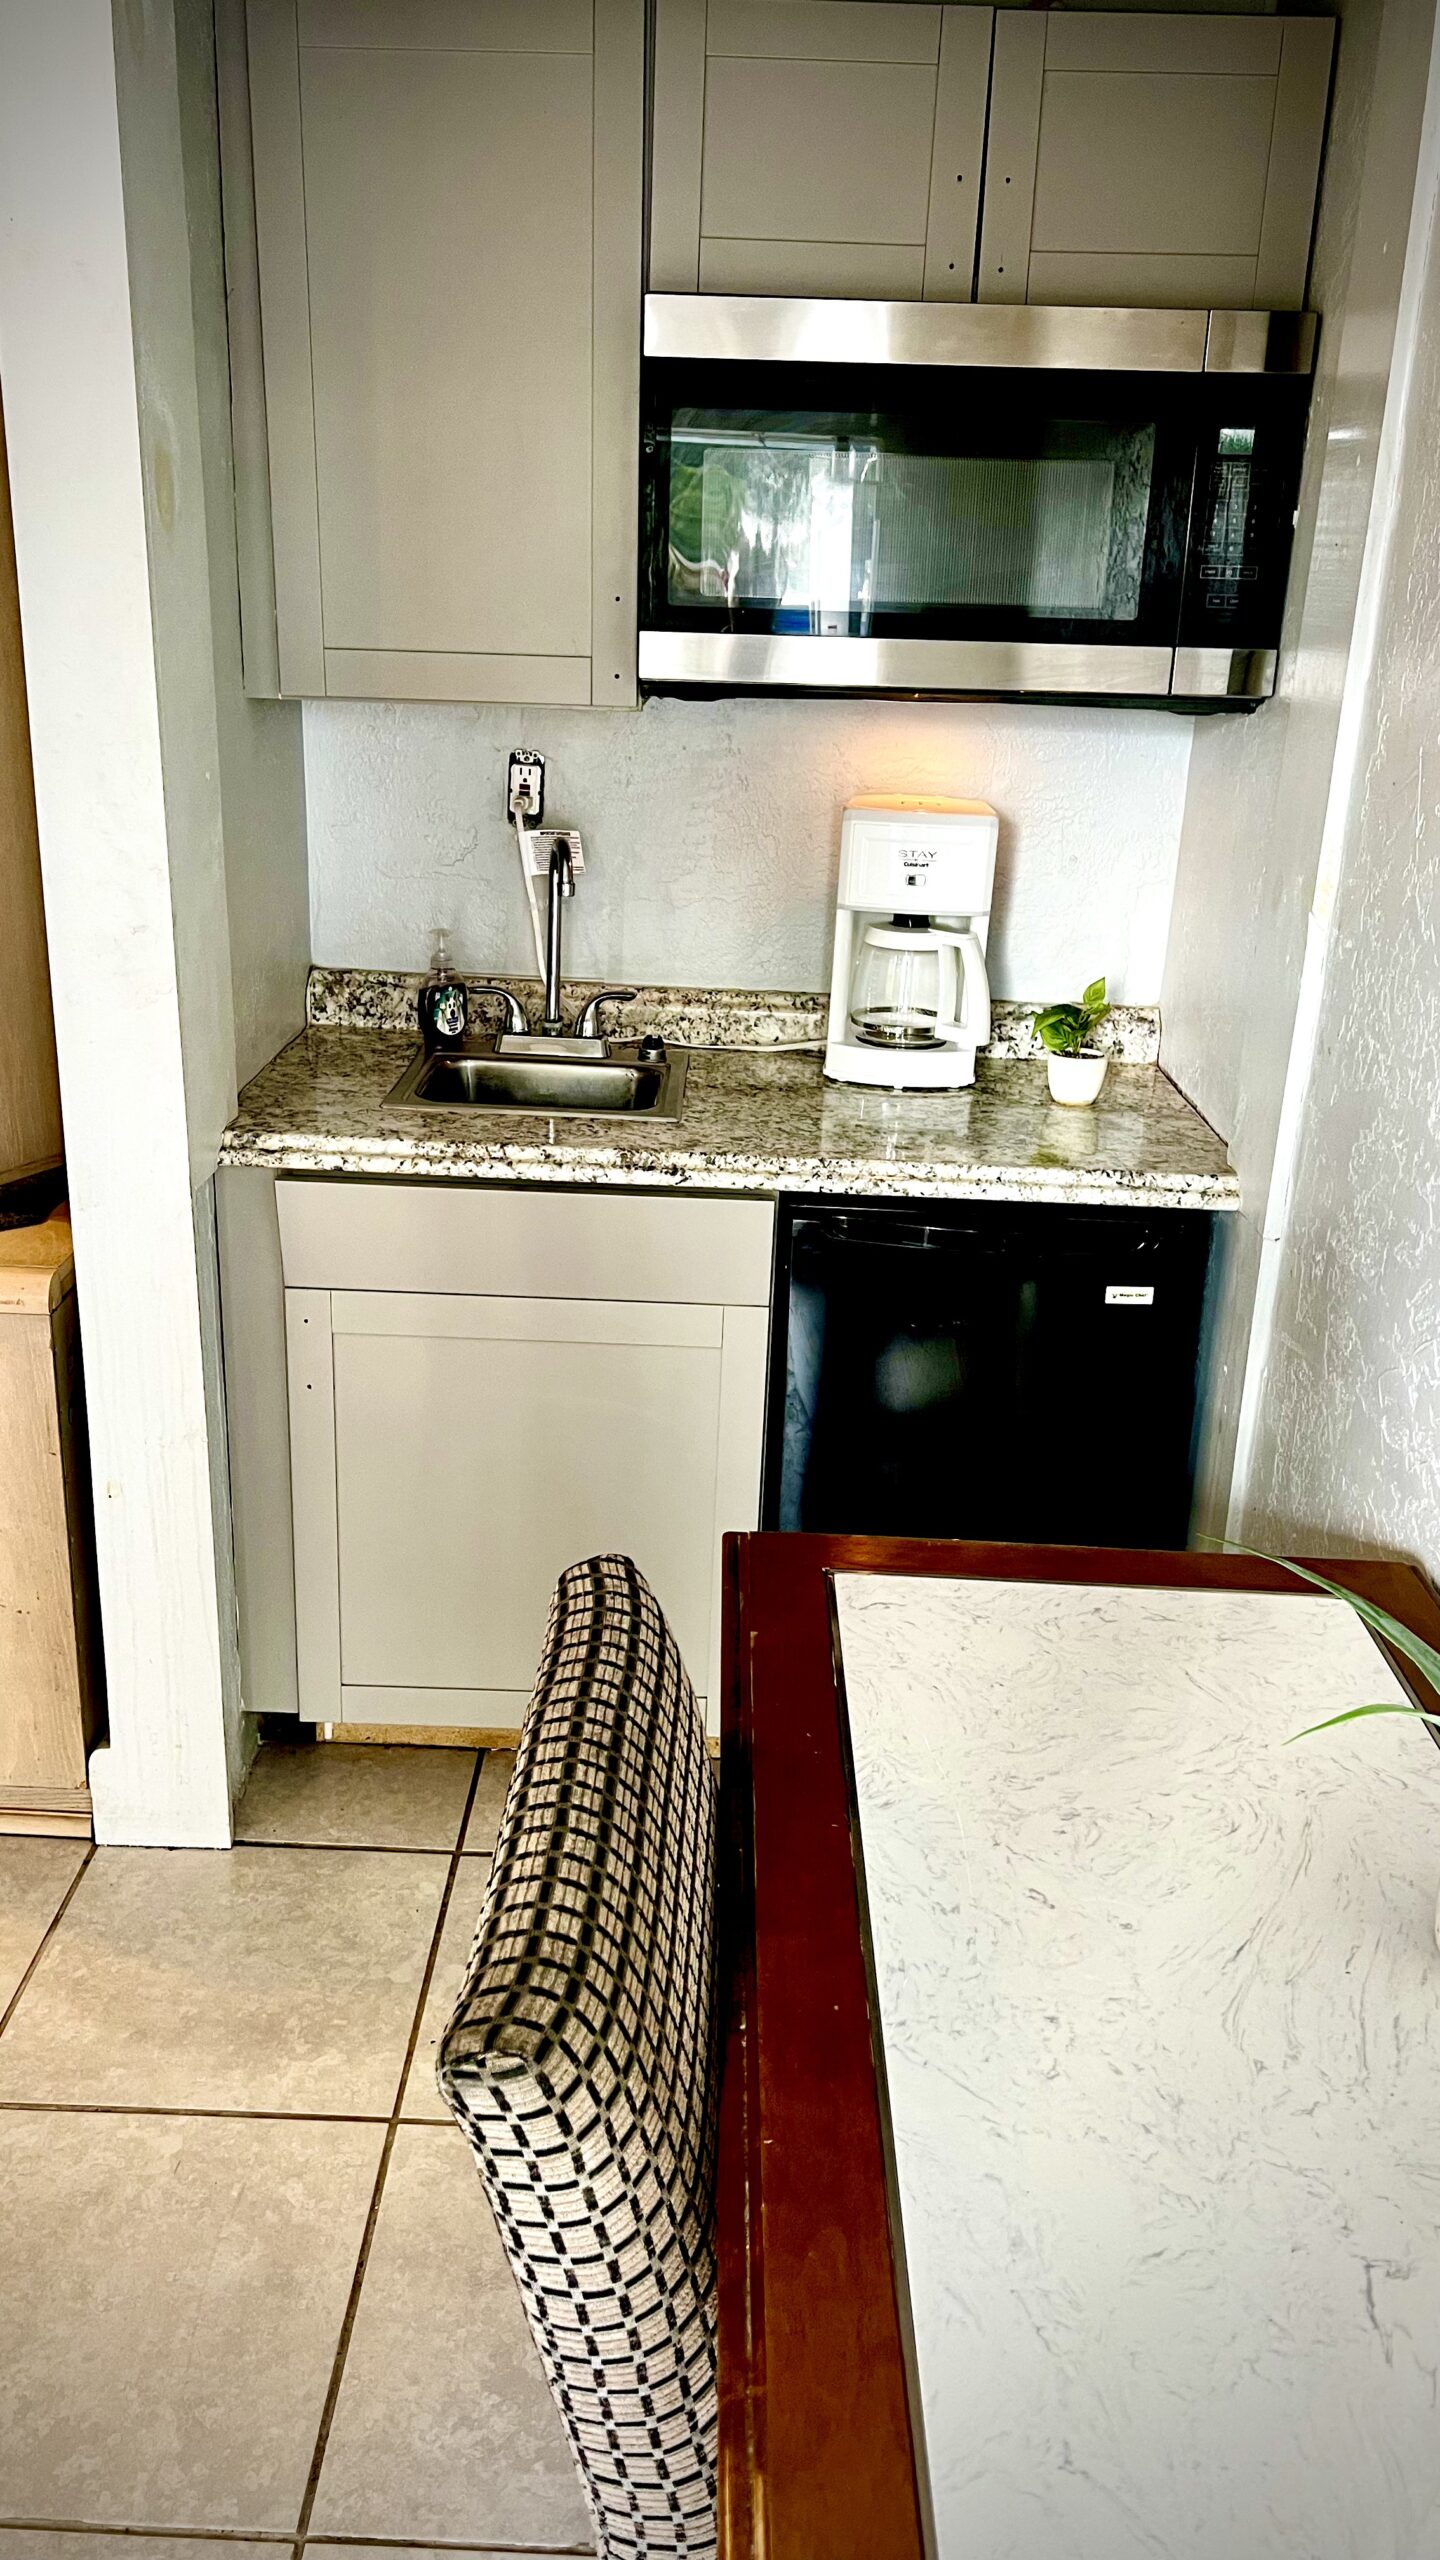 Ocean Air motel room kitchenette for weekly stay affordable rates